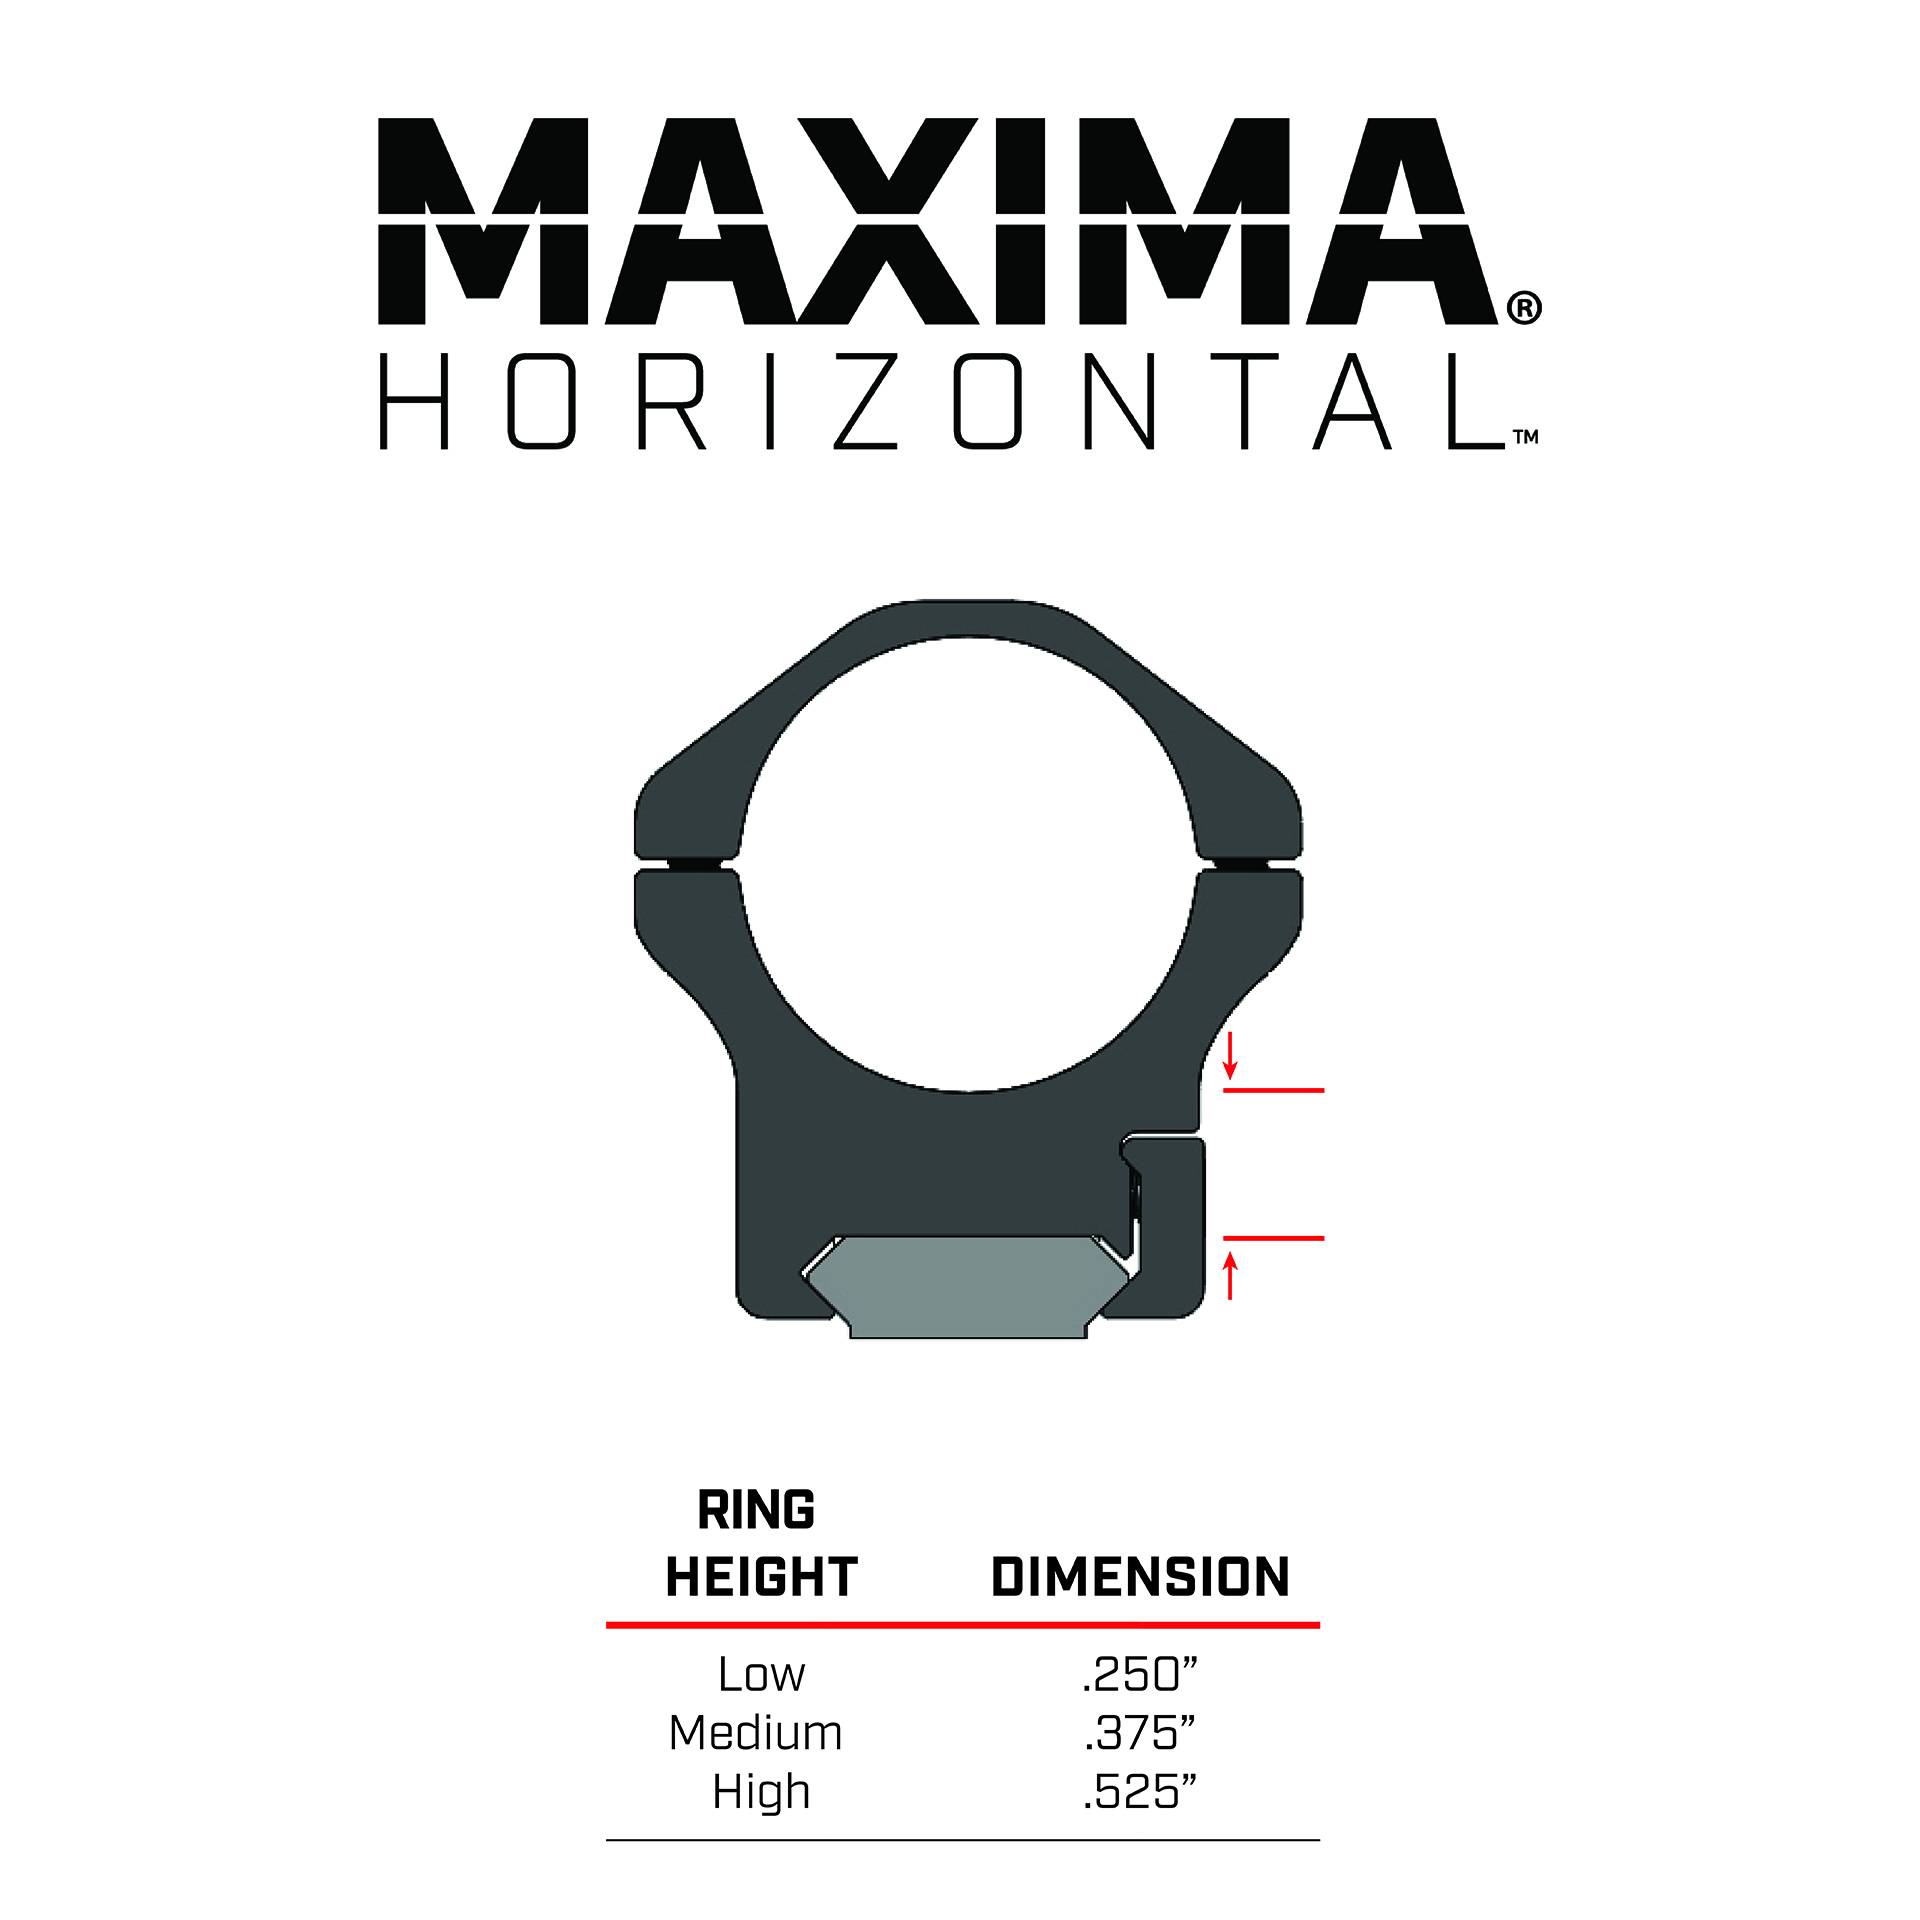 height for maxima horizontal scope rings. low .250 inch, med .375 inch, high .525 inch